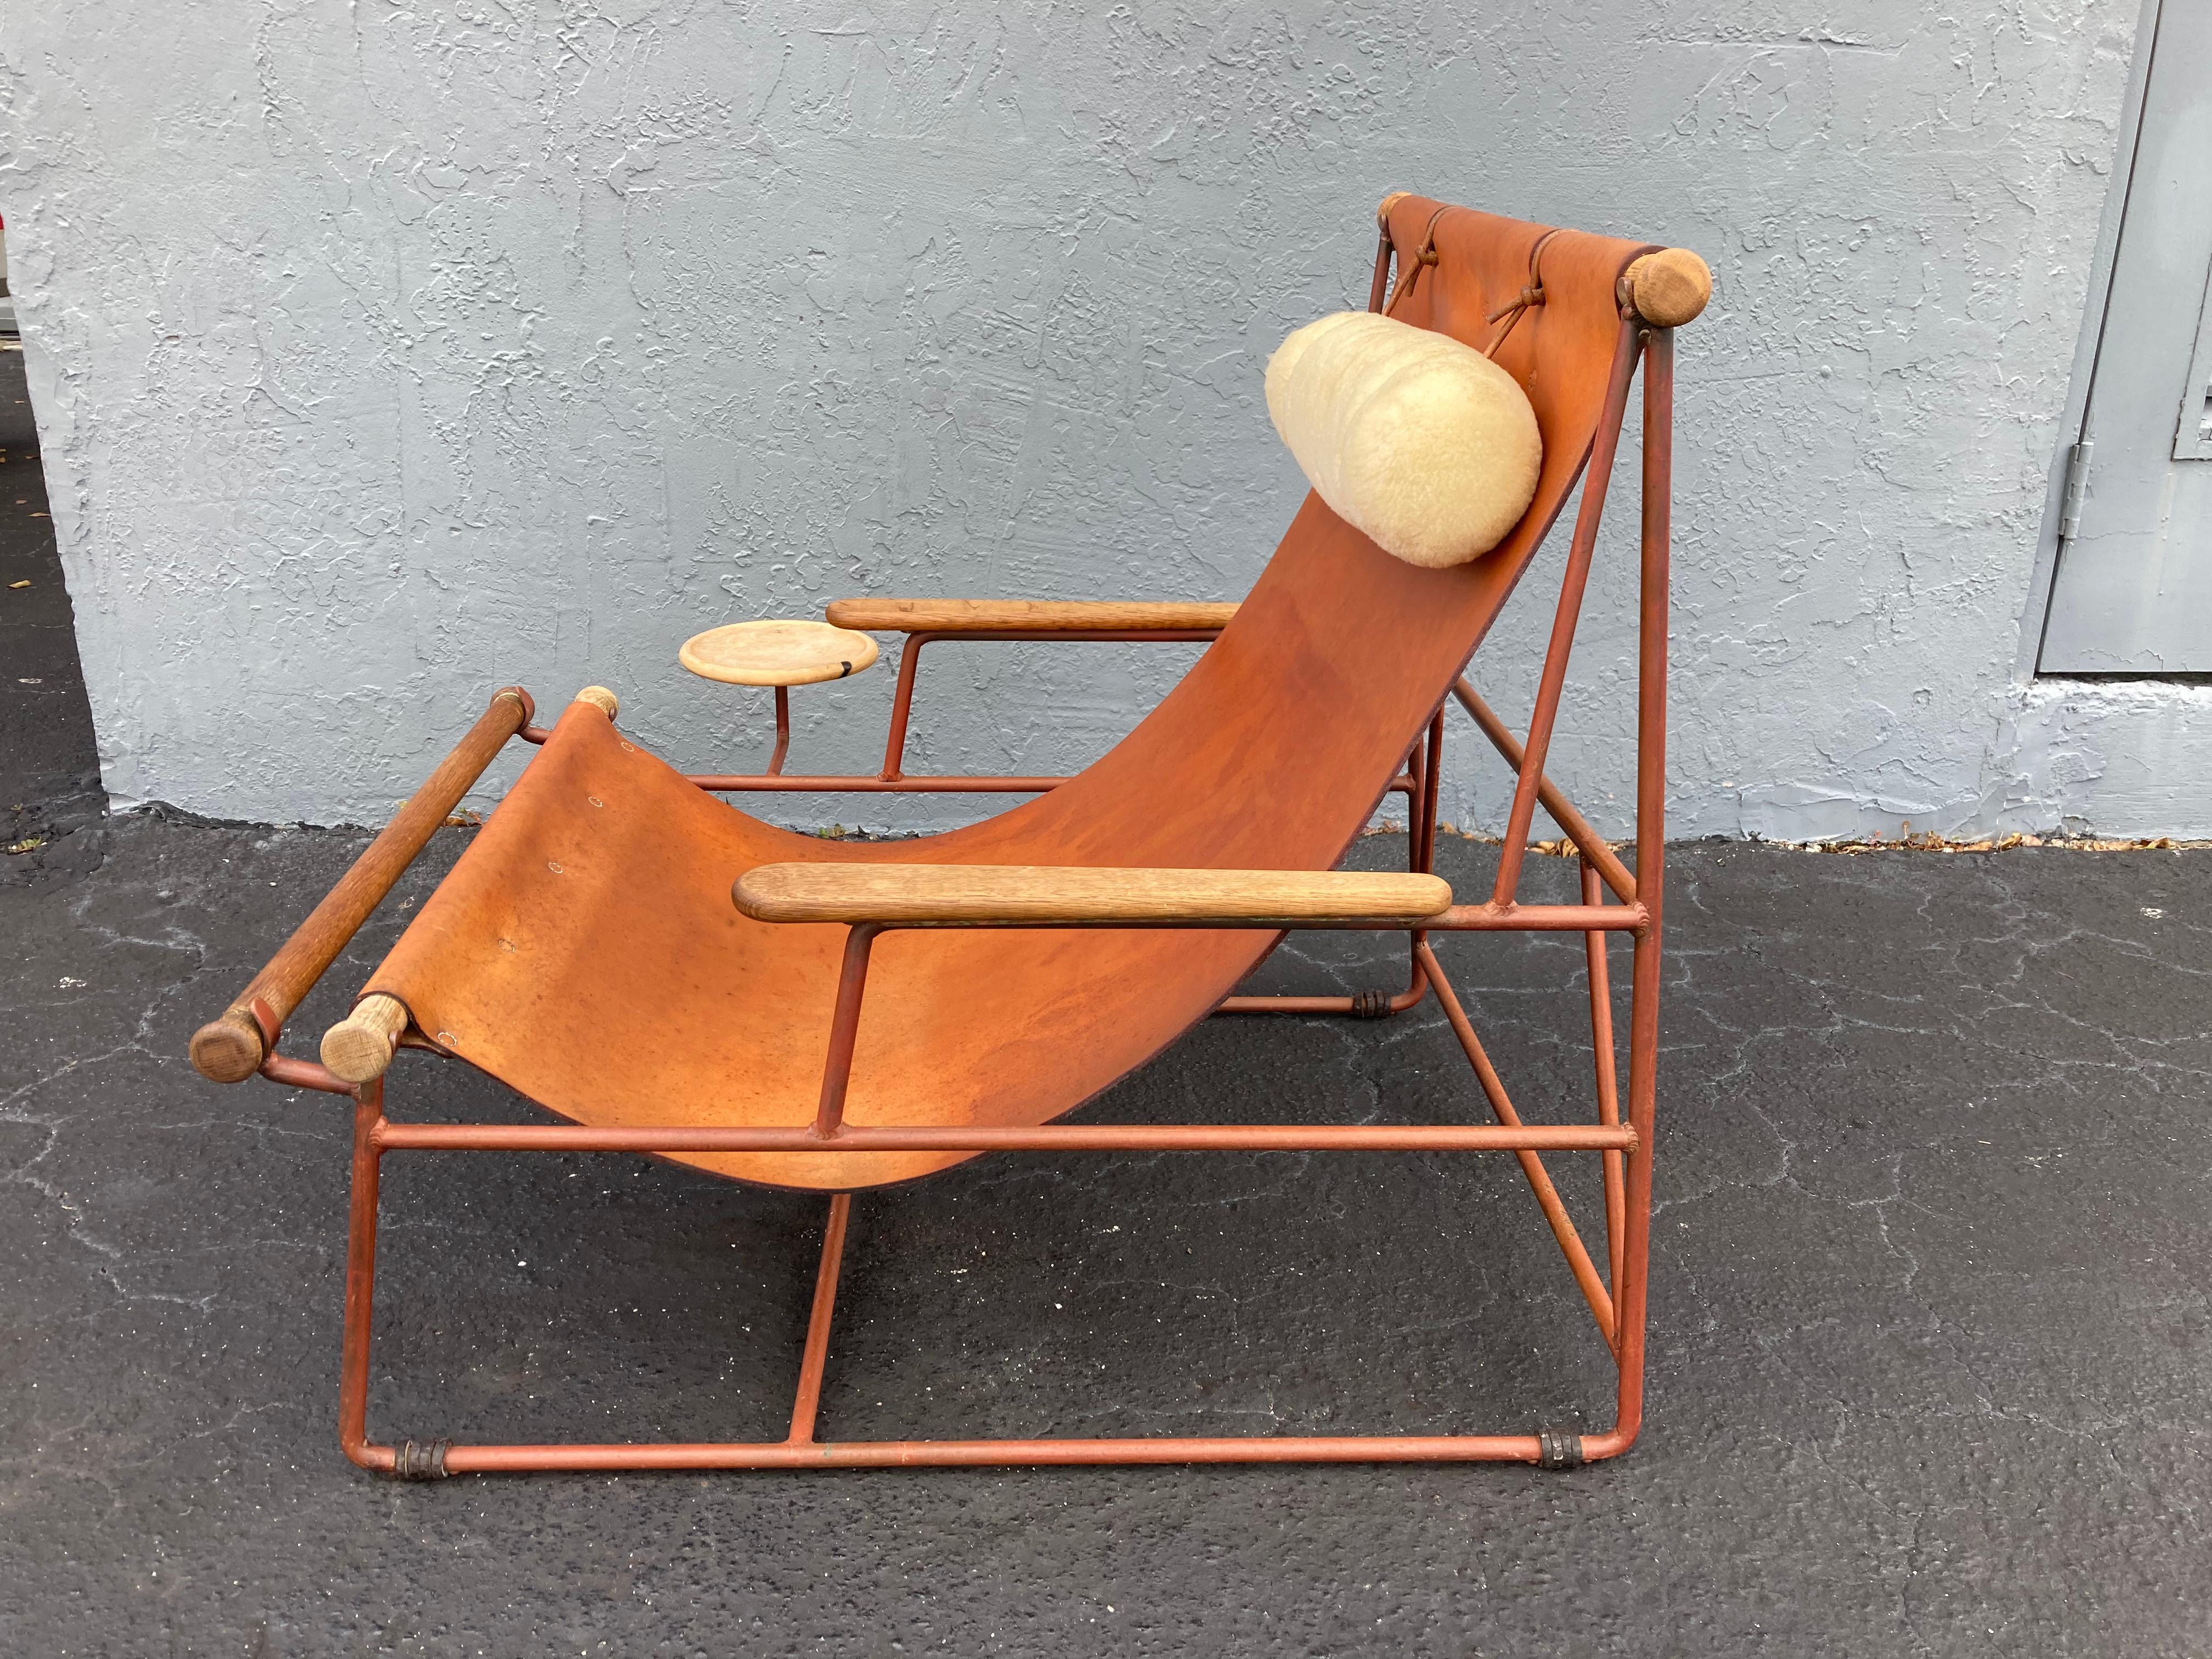 Beautiful Deck Lounge Chair Designed by Tyler Hays and Made by BDDW, Leather 3